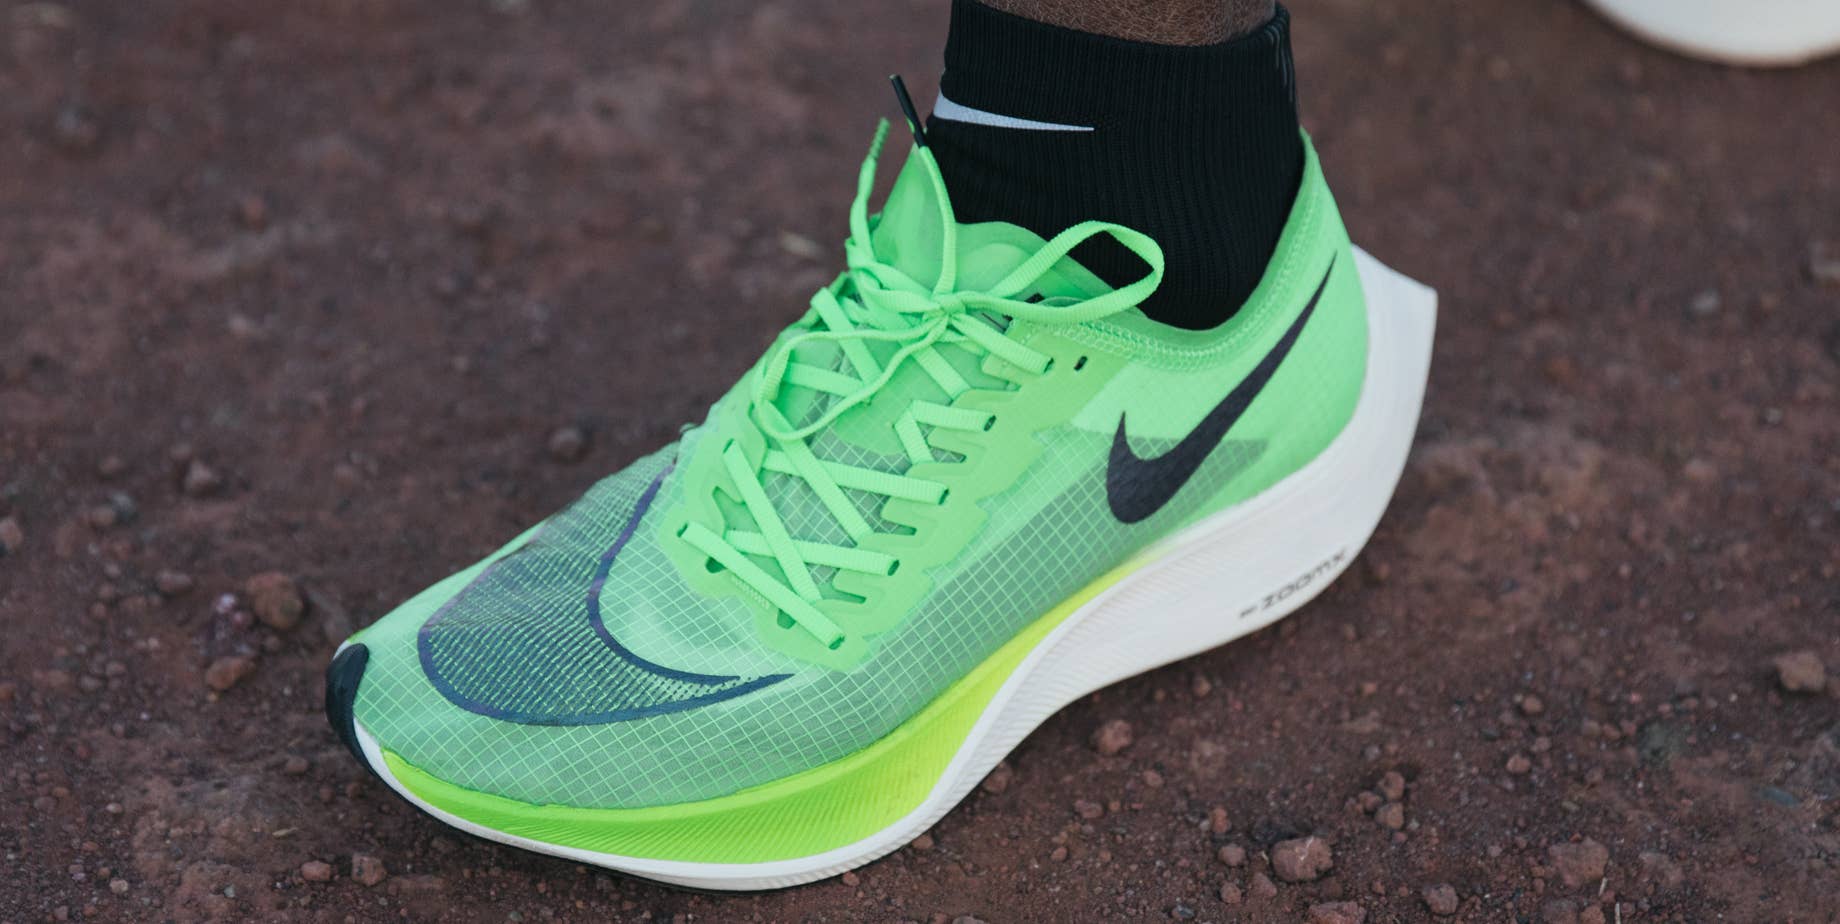 Nike Unveil The Much Anticipated ZoomX Vaporfly NEXT% Running Shoe ...